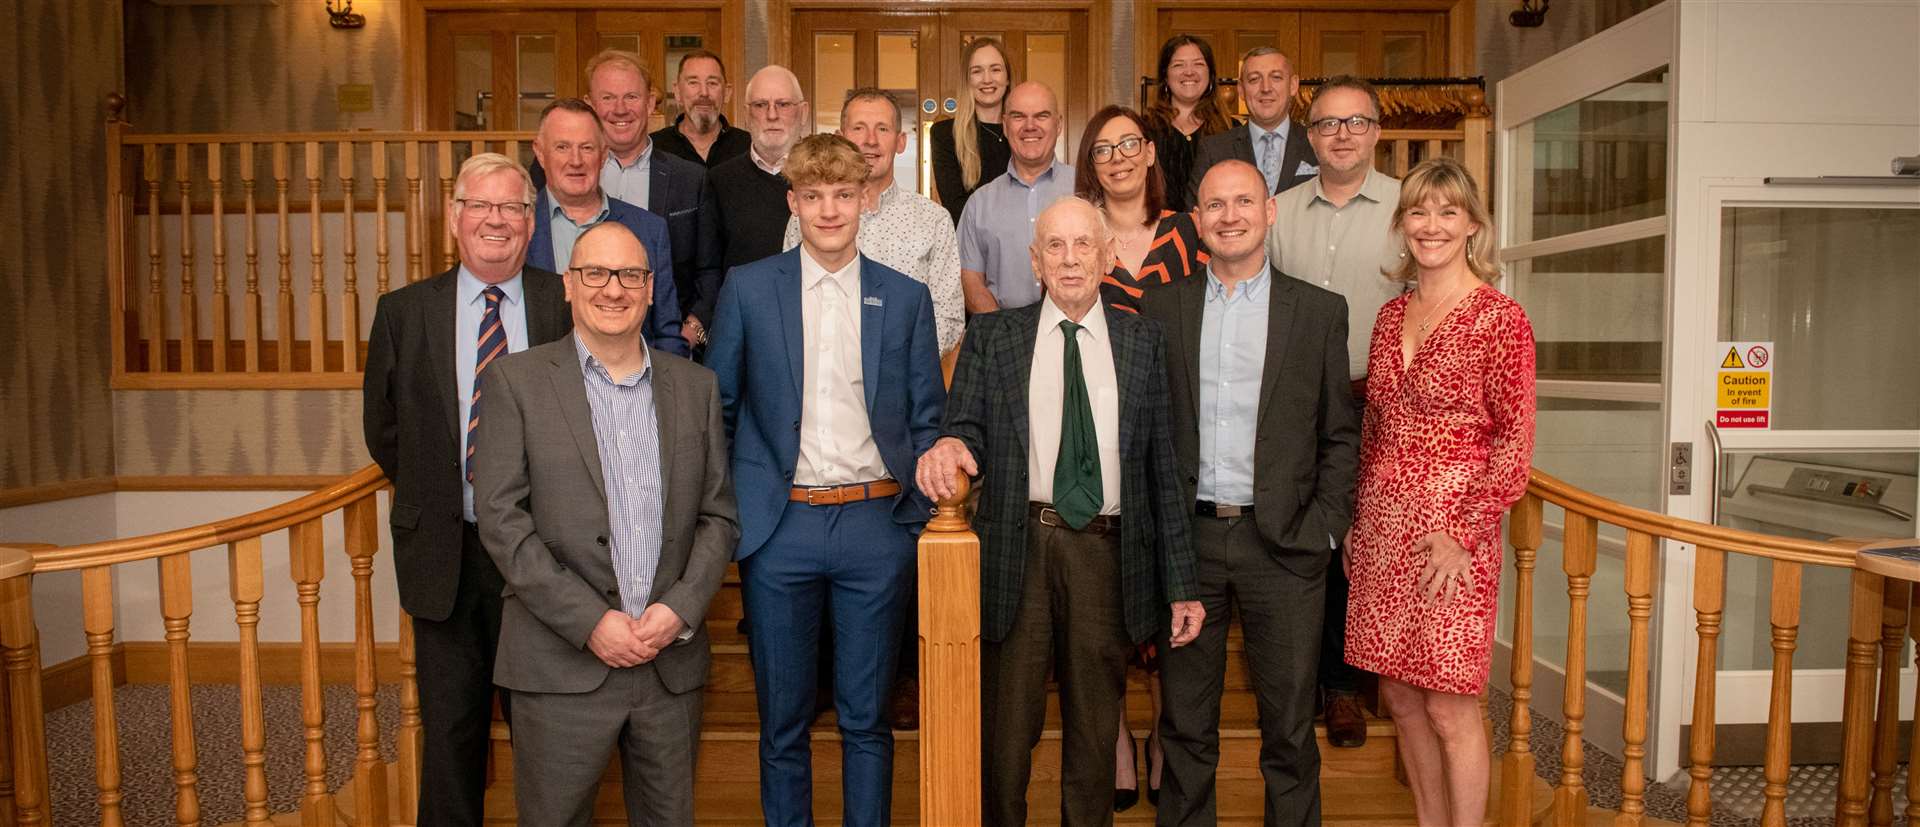 The directors, and long-term staff members joined together to celebrate 70 years of the Cairngorm Group.